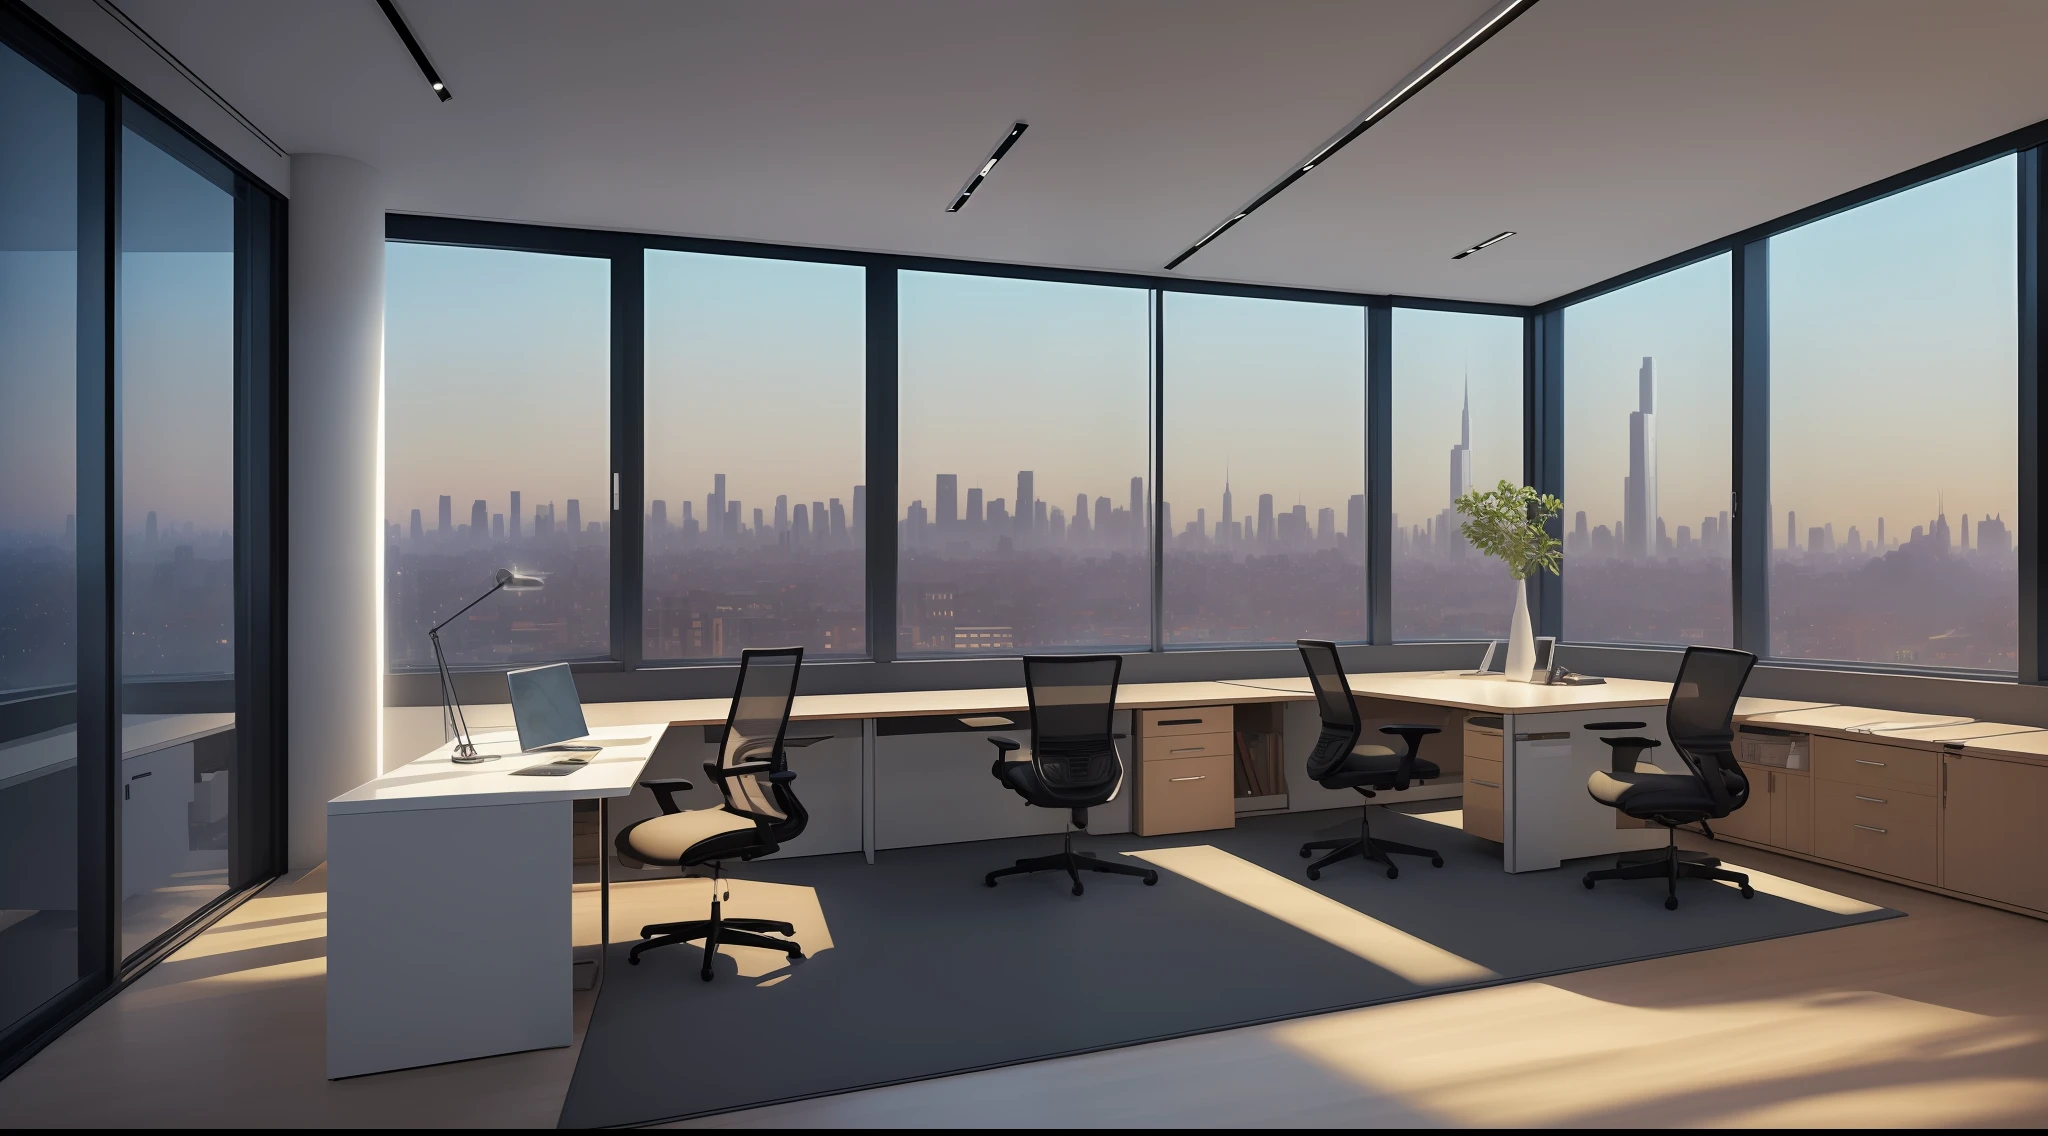 ((In the style of Charles E. Burchfield)), photorealistic, sophisticated, minimalistic, contemporary, professional, virtual office, sleek design, serene lighting, vibrant colors, high resolution, city landscape